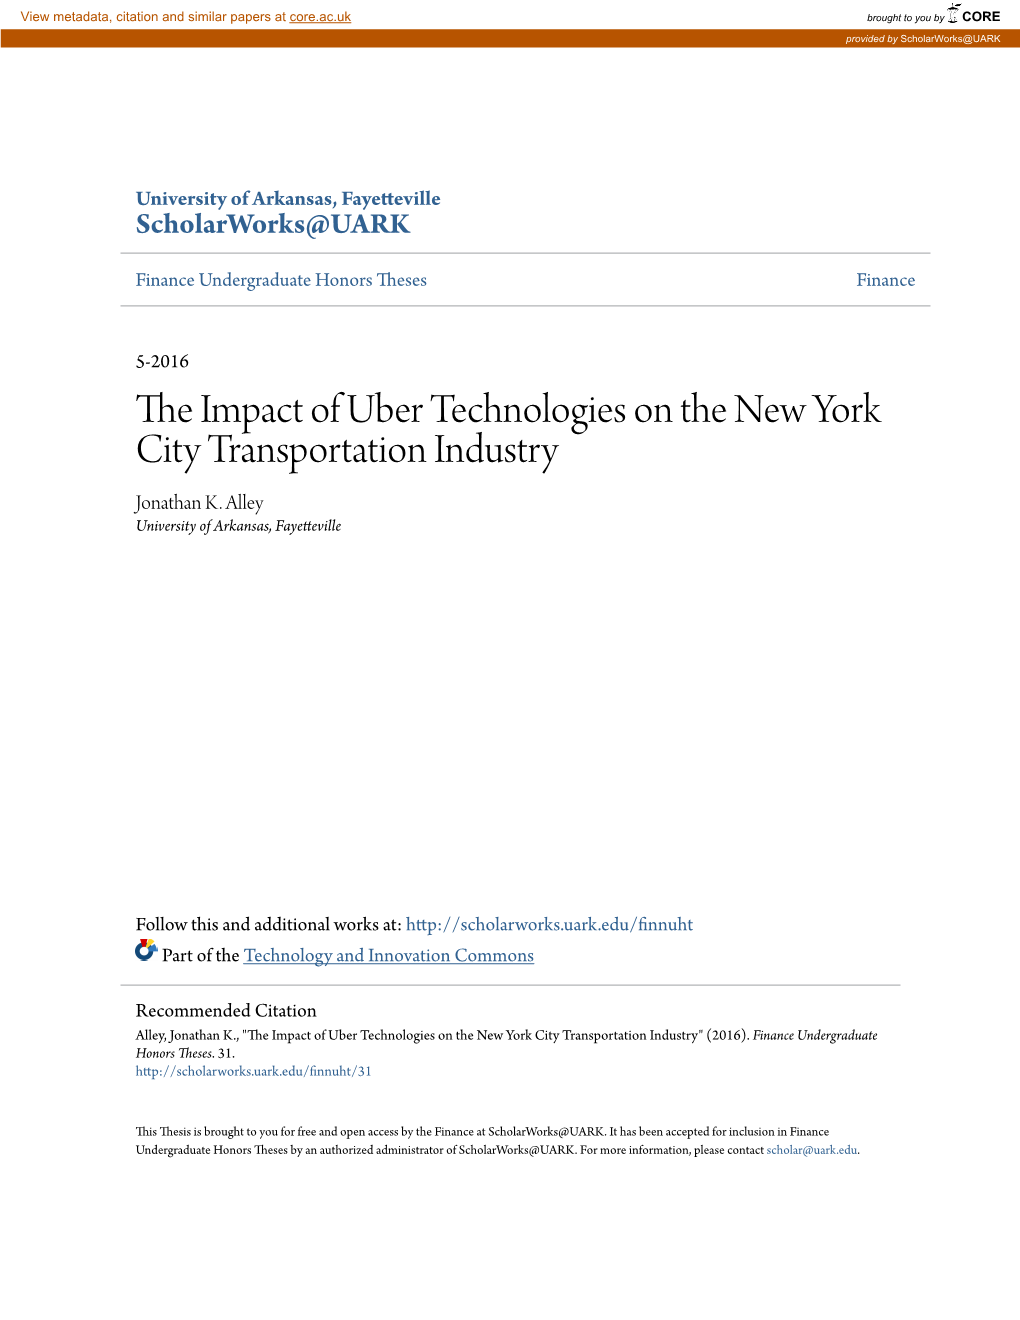 The Impact of Uber Technologies on the New York City Transportation Industry